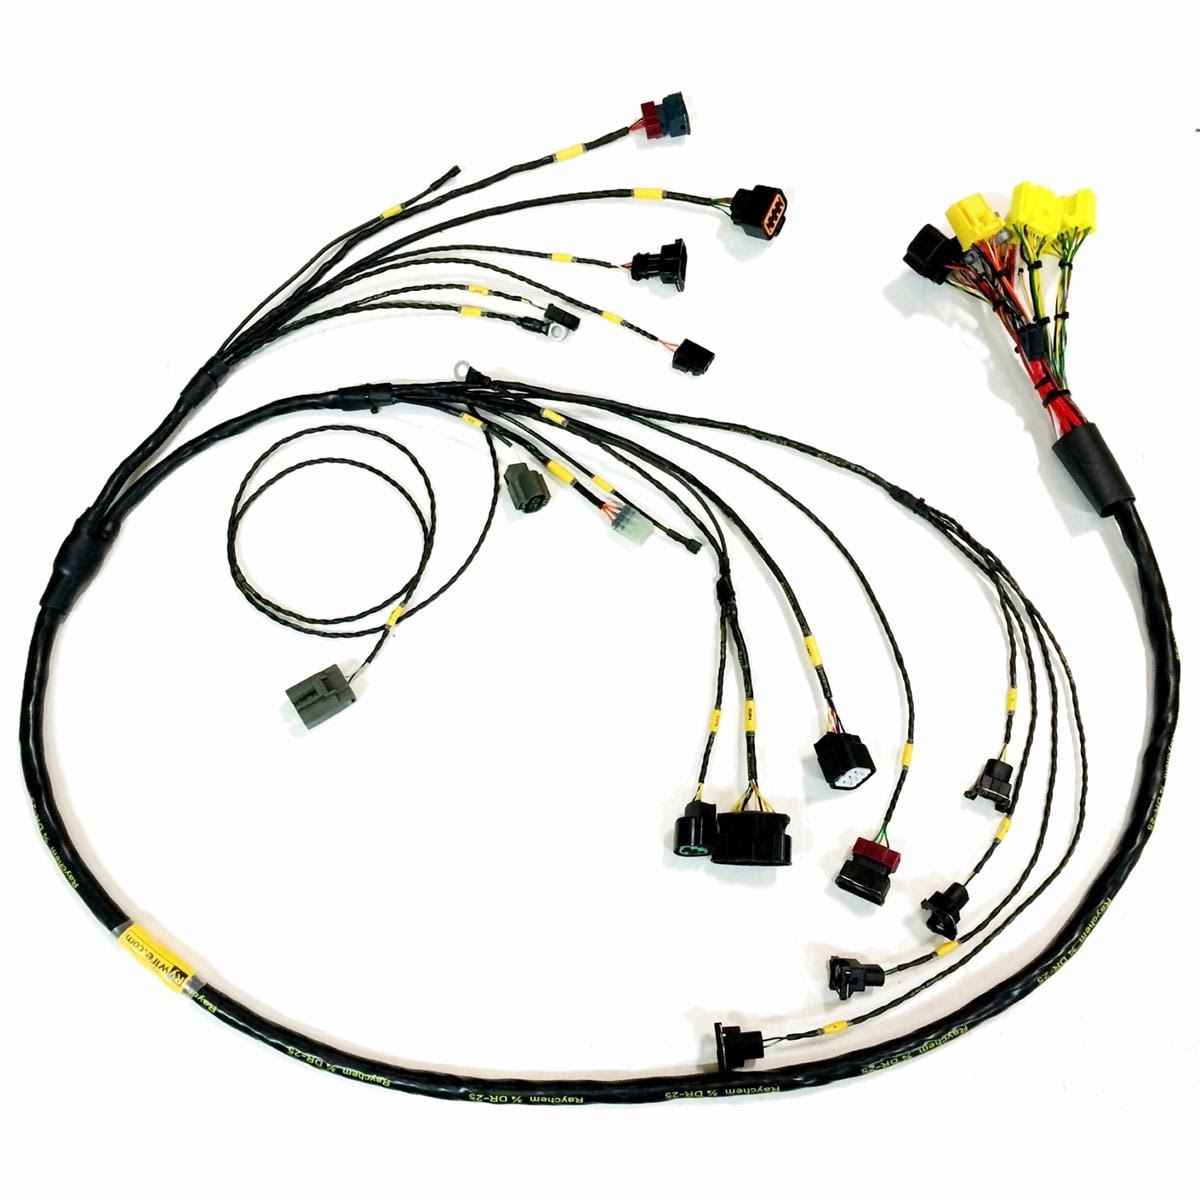 Engine Wiring Harness Repair: Why Is It Important the Cost?